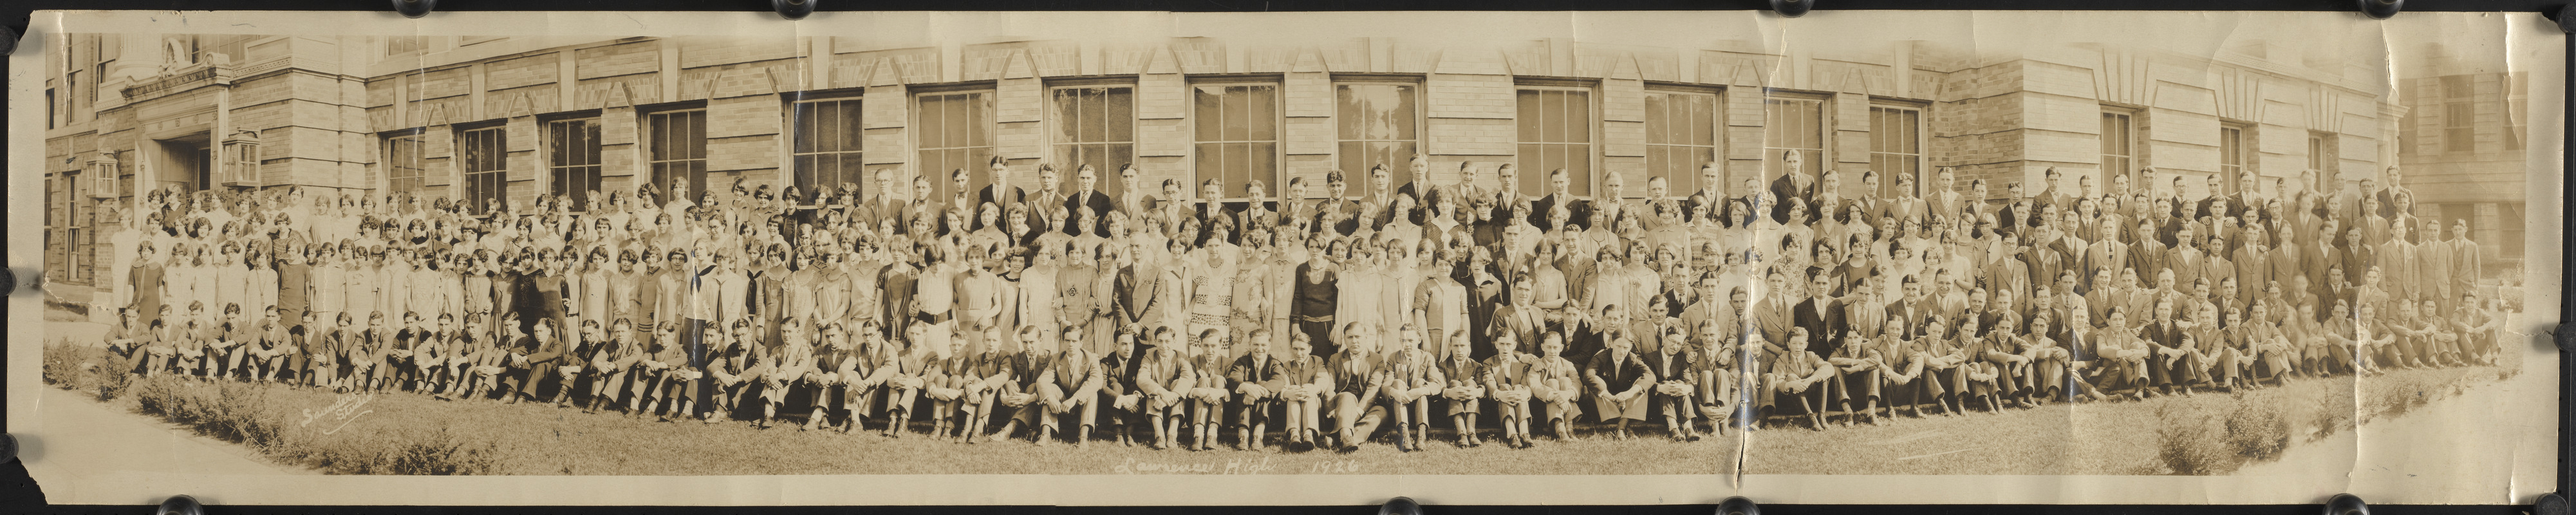 Lawrence High 1926